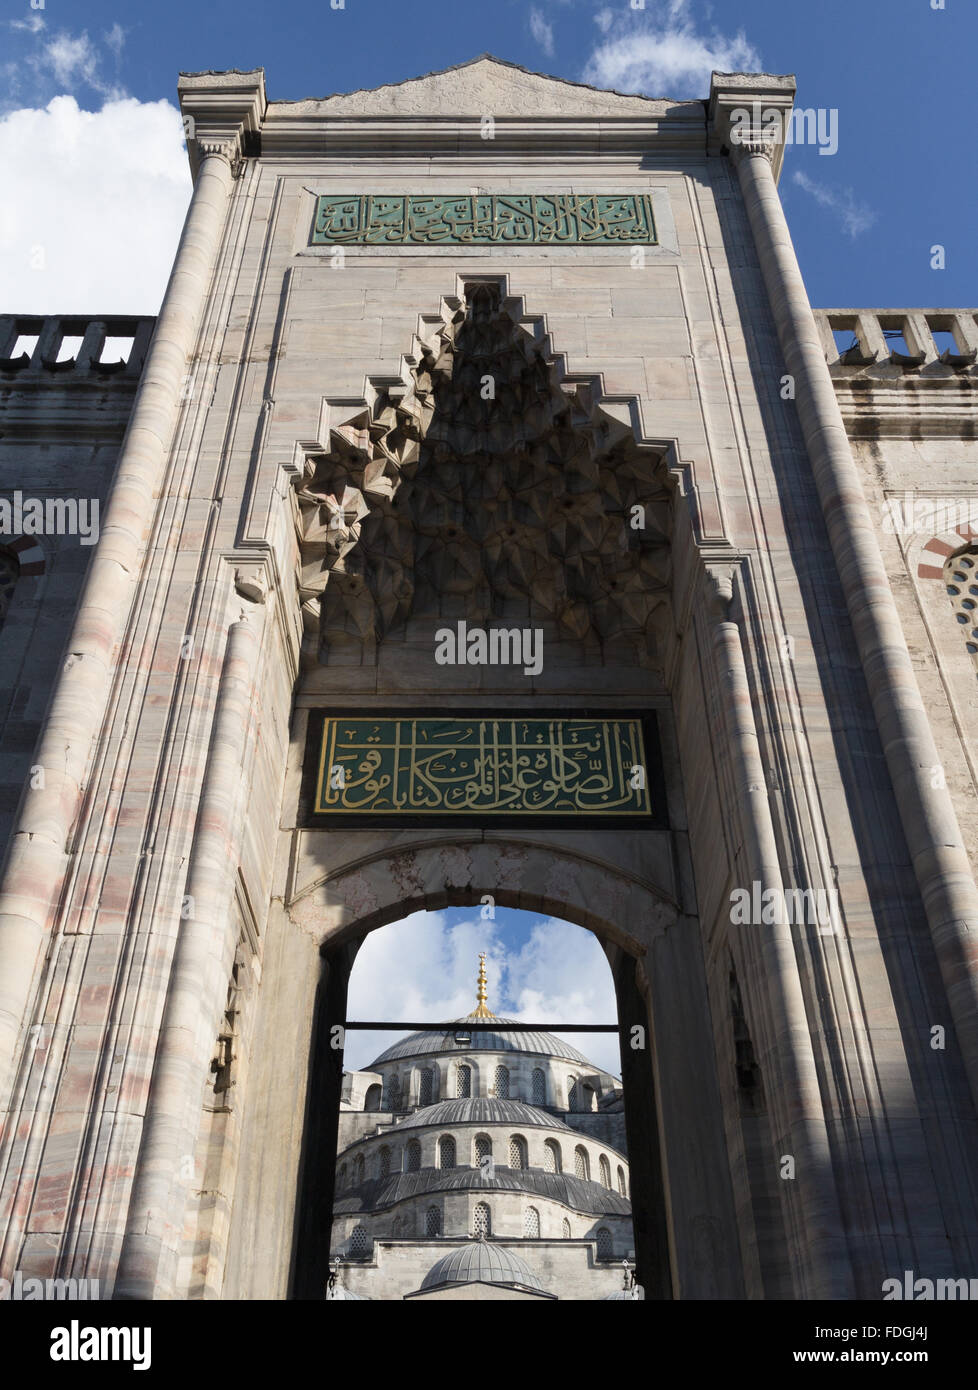 The Blue Mosque Entrance, Istanbul, Turkey. Stock Photo